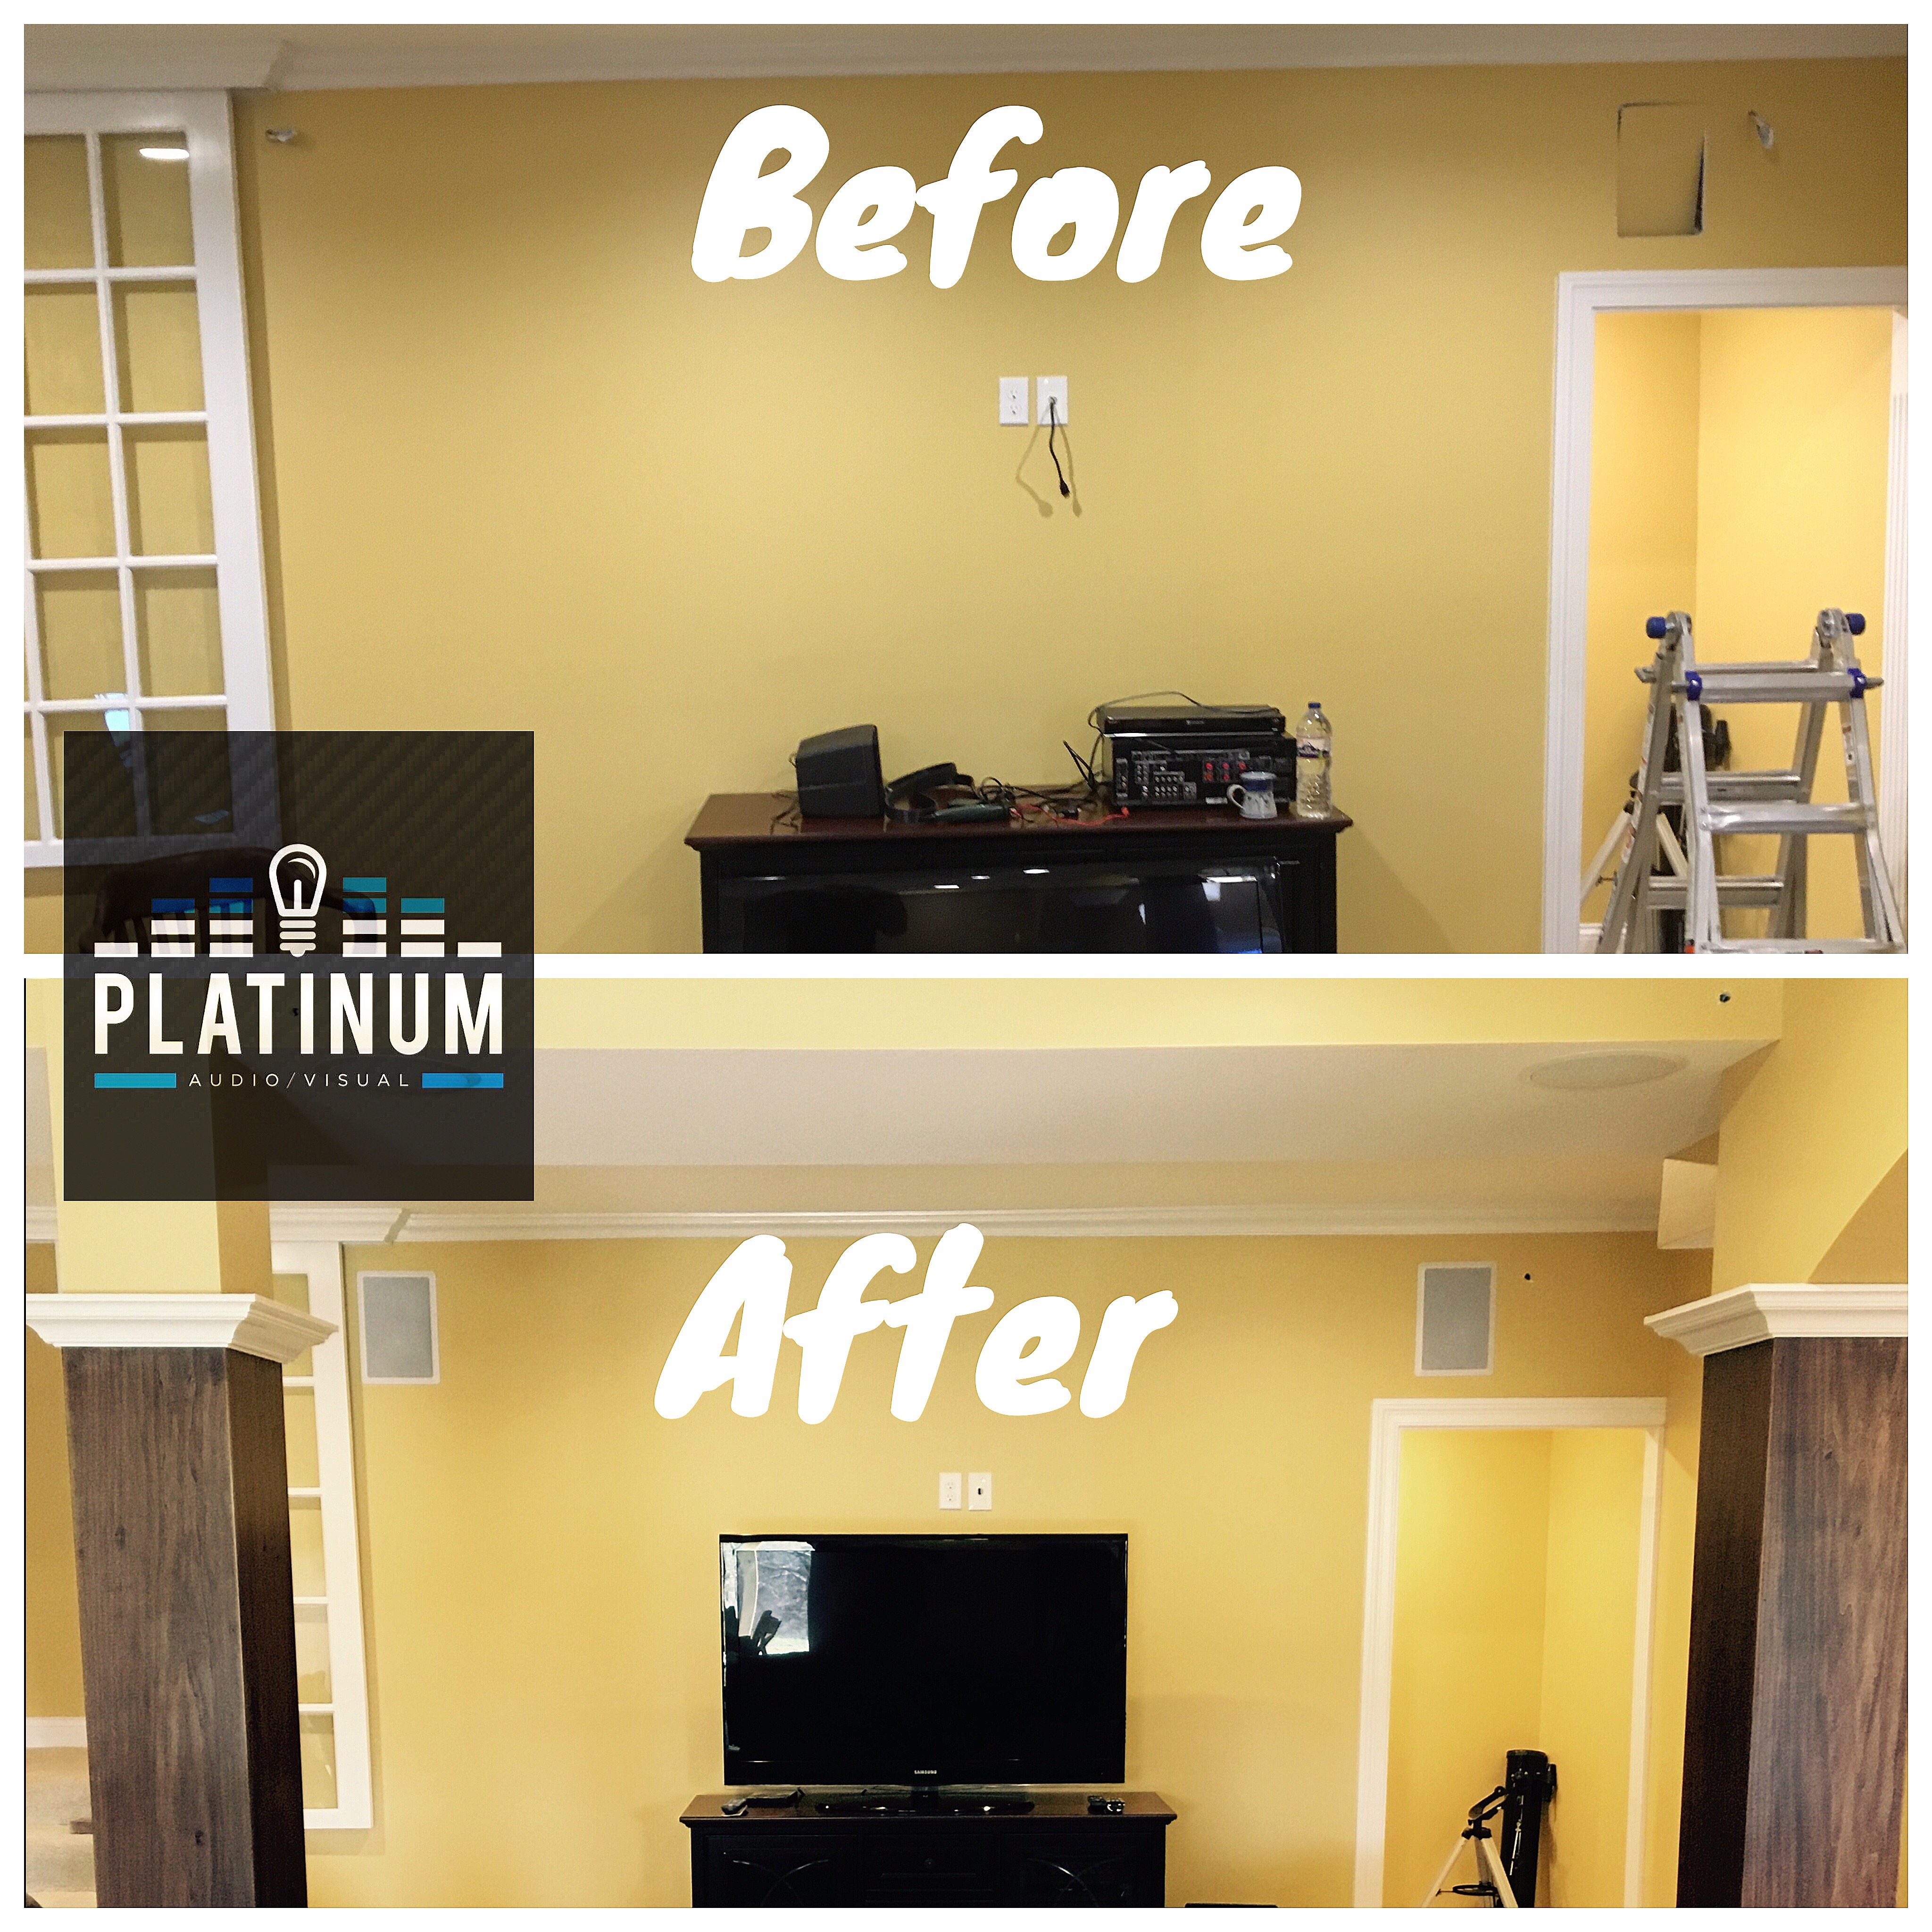 “Look What A Difference” 5.1 In-Wall Home Theater System Installation in Berea, KY